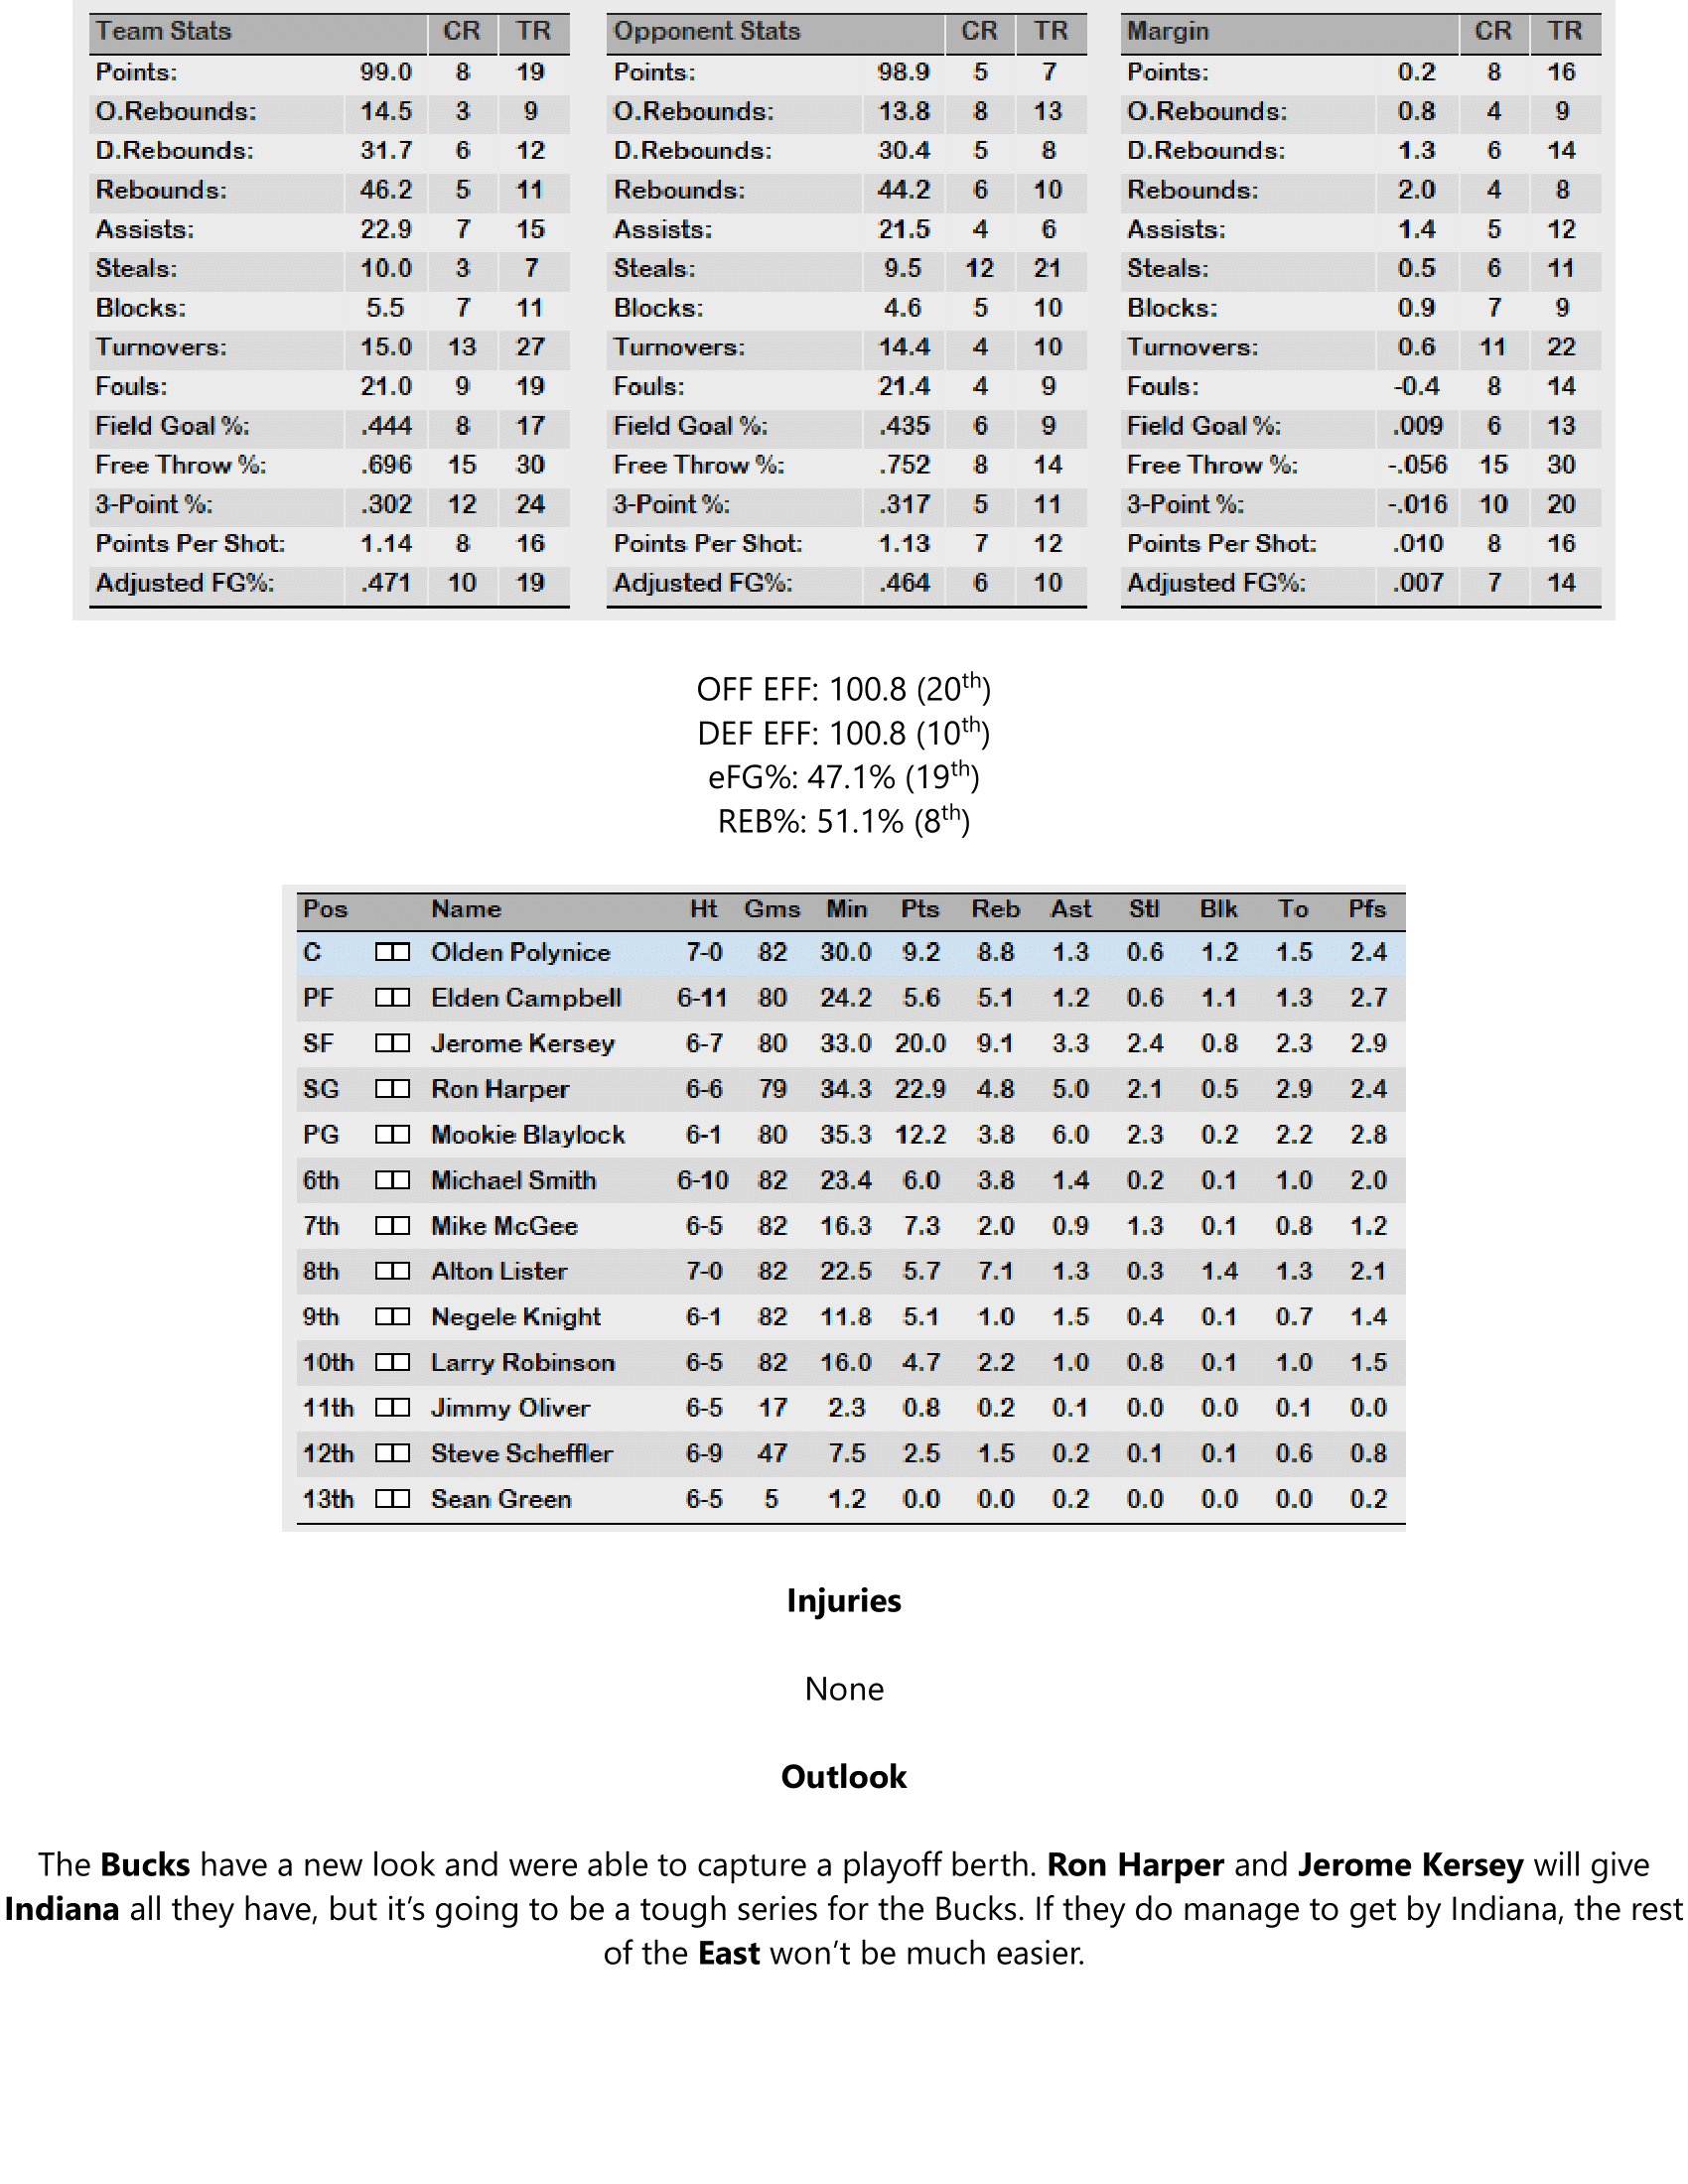 91-92-Part-4-Playoff-Preview-25.png